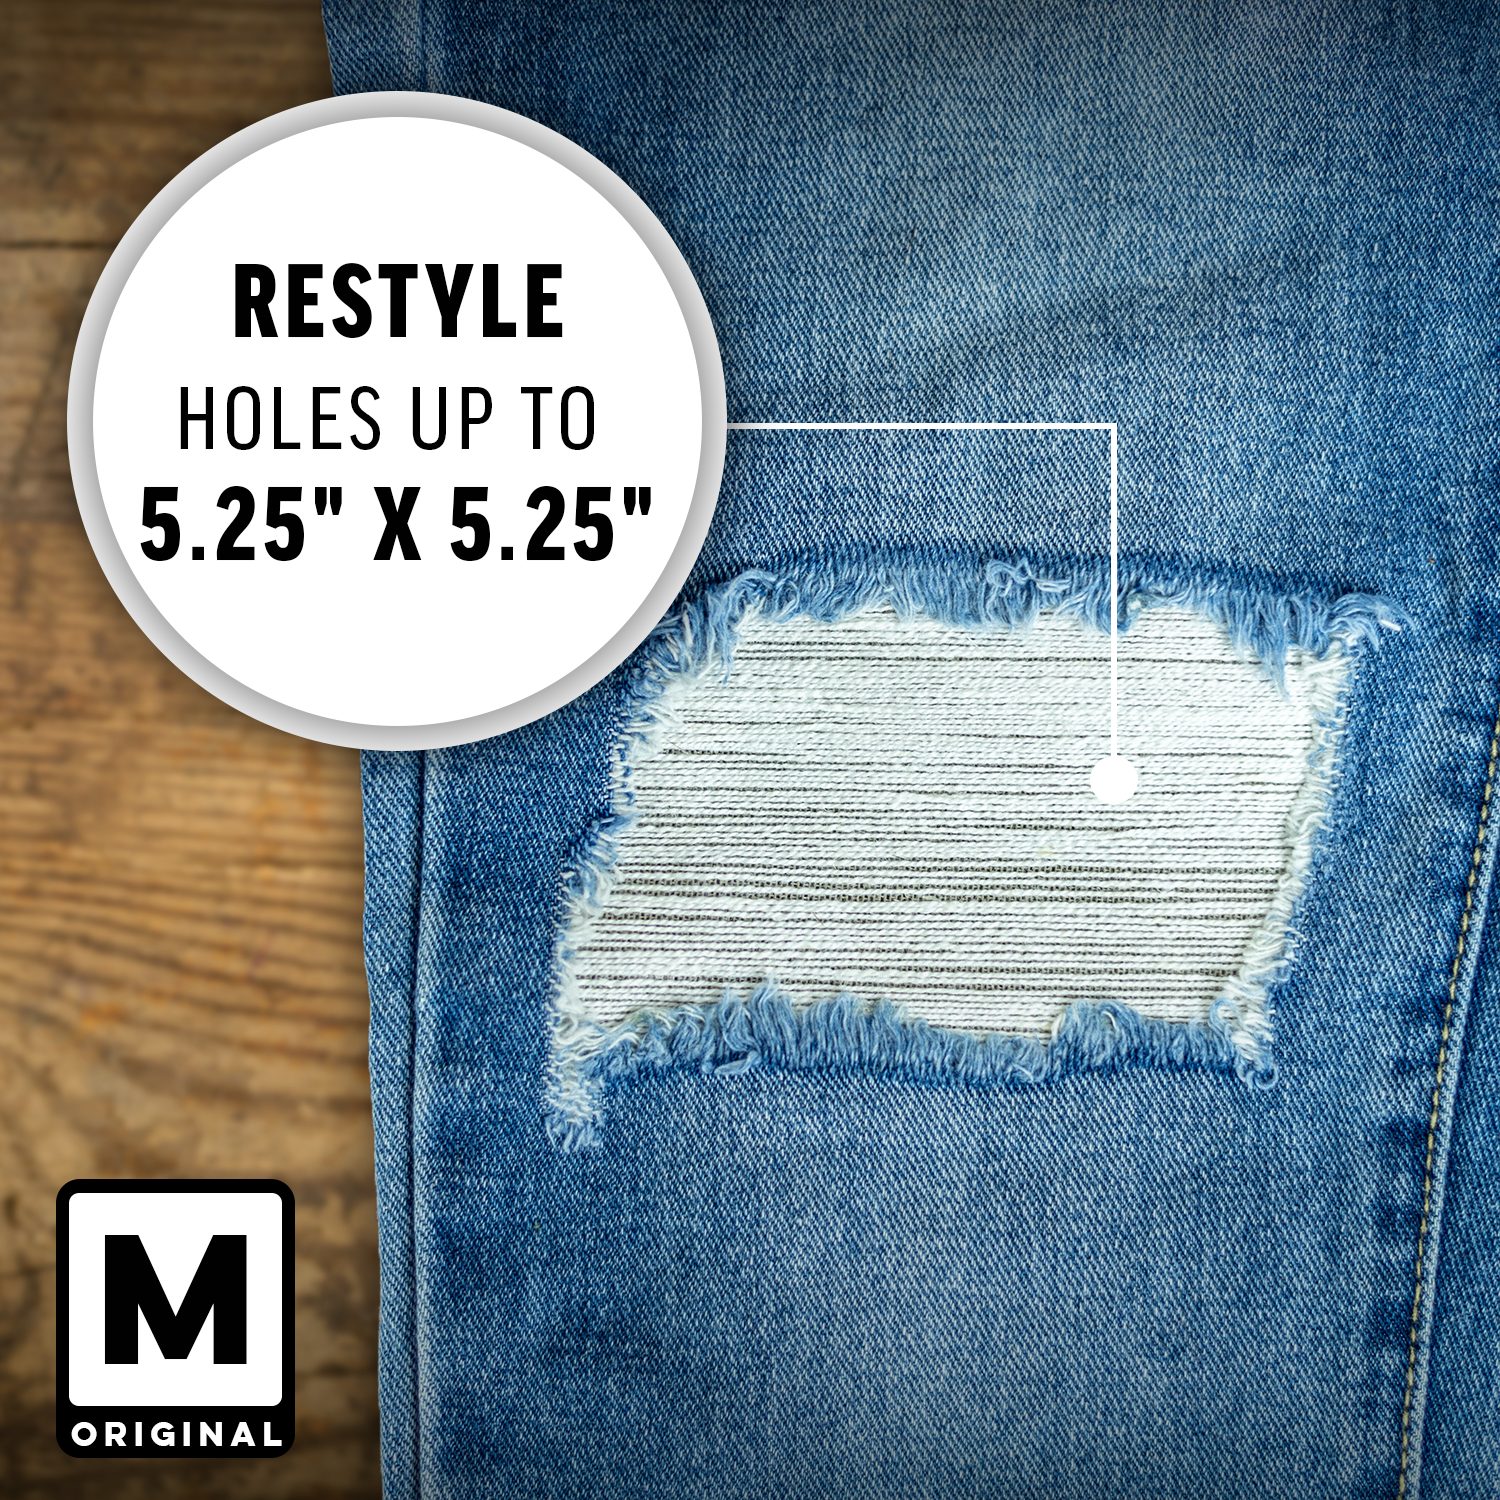 Mending: Functional Patches for Ripped Jeans - Frugal Upstate